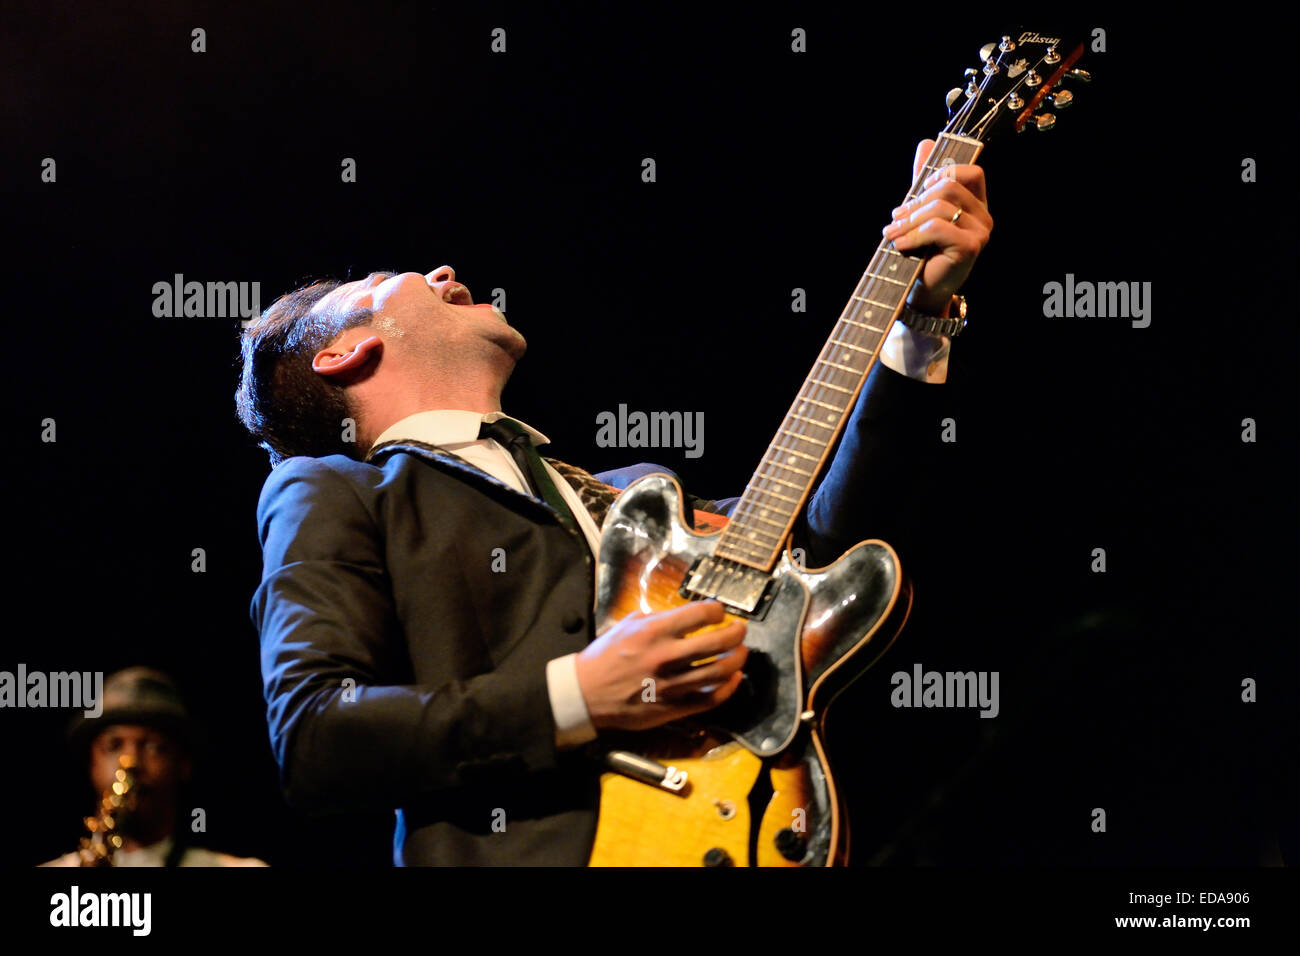 BARCELONA - MAY 15: Eli Paperboy Reed, American singer and songwriter, performance at Barts stage on May 15, 2014 in Barcelona. Stock Photo